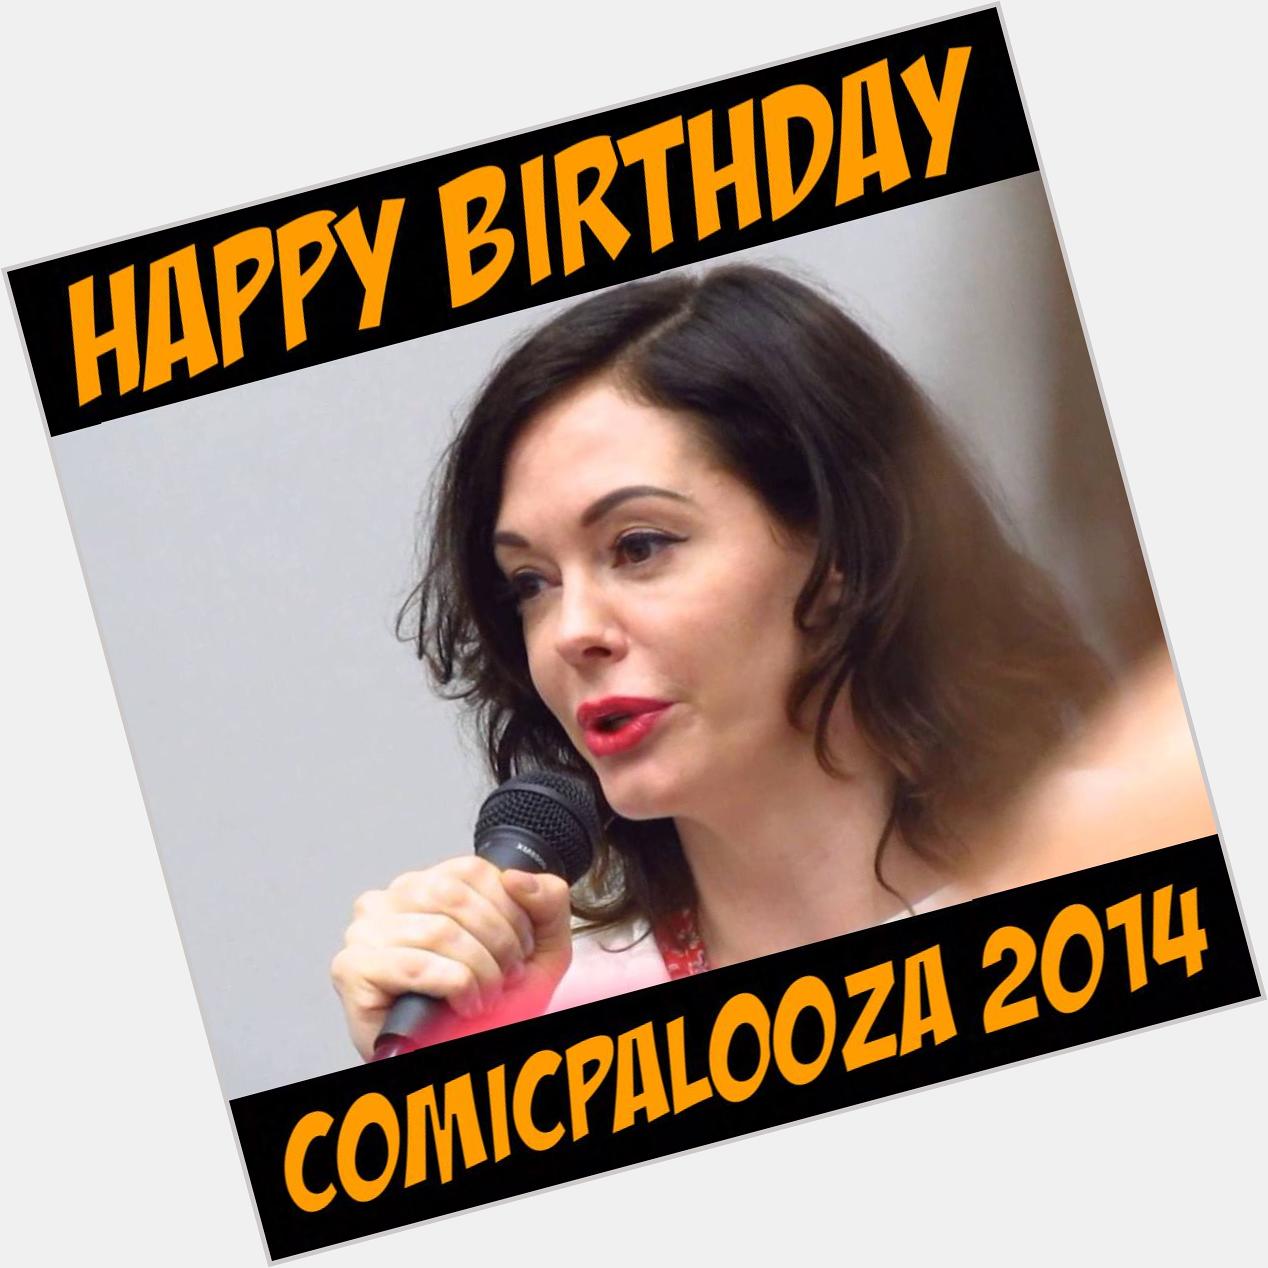 Happy birthday to our 2014 guest Rose McGowan 